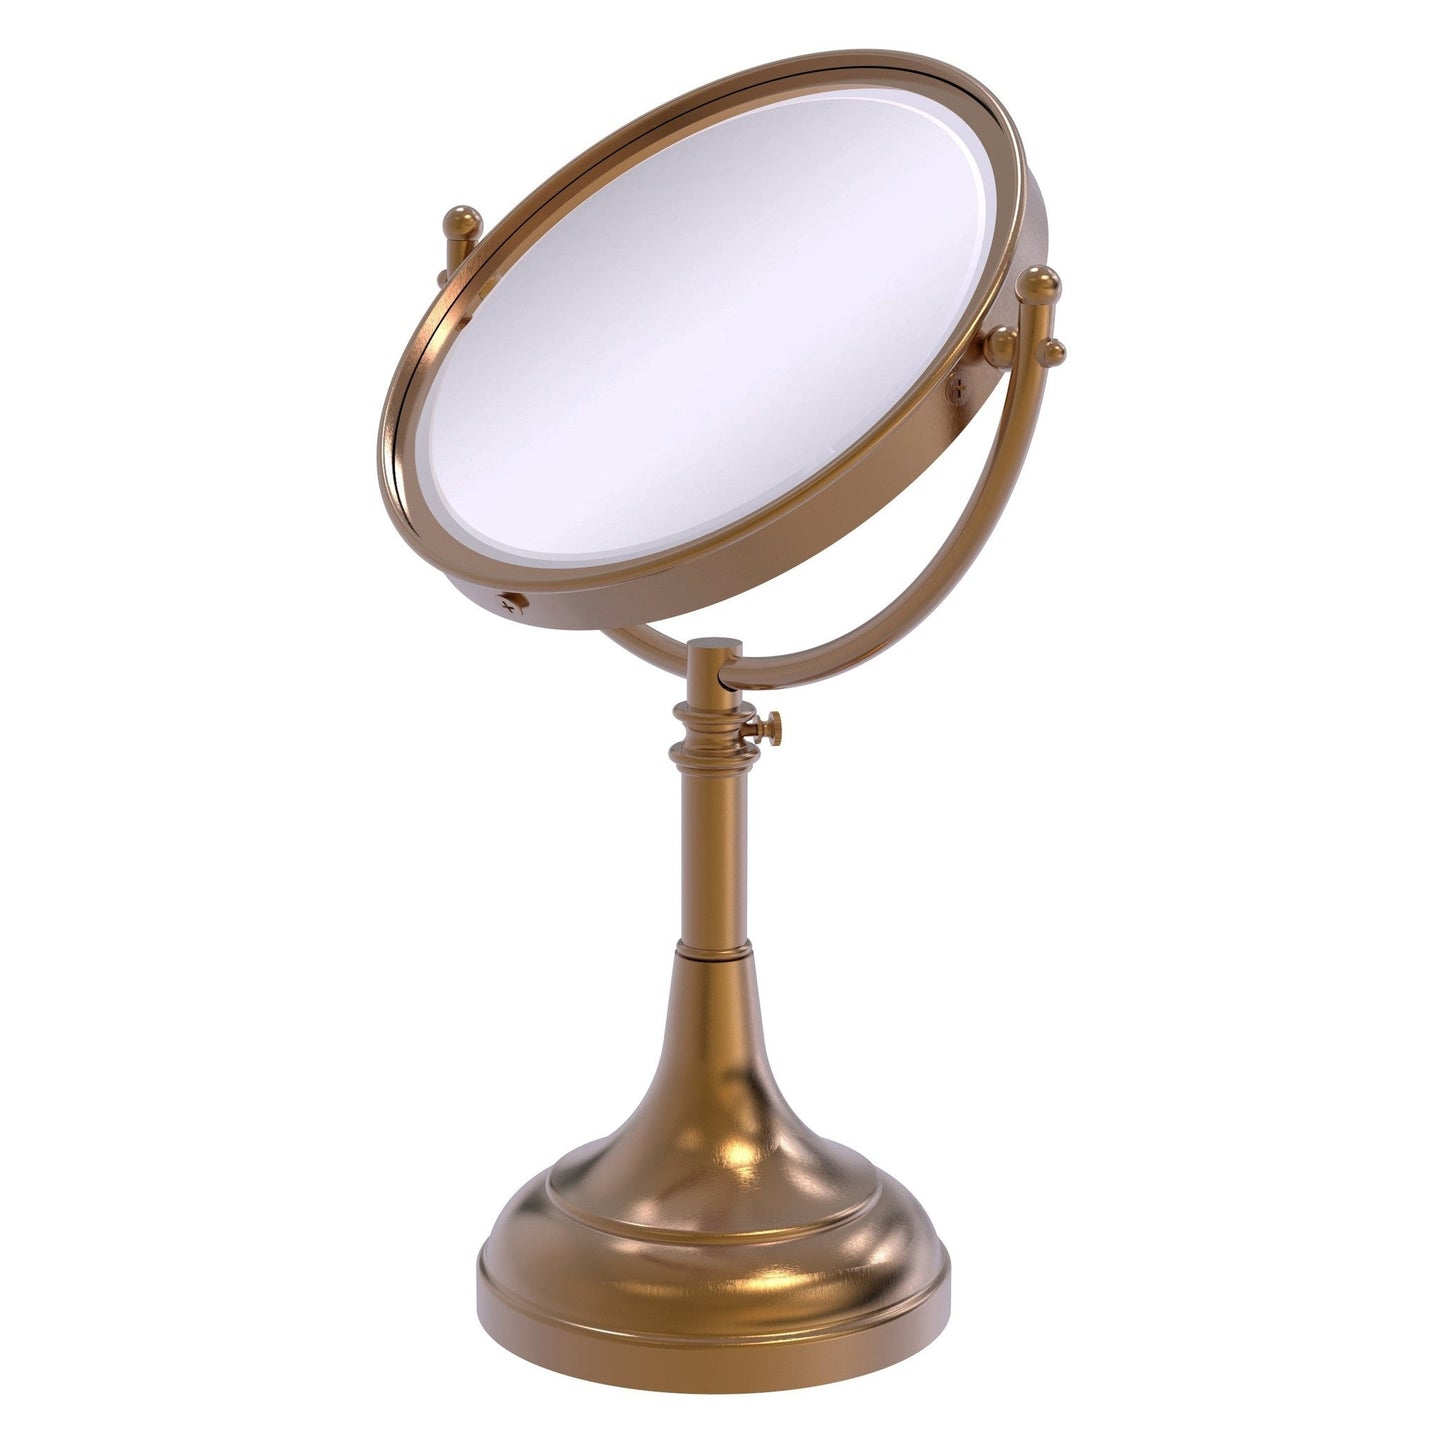 Allied Brass DM-1/3X 8" x 8" Brushed Bronze Solid Brass Vanity Top Make-Up Mirror 3X Magnification